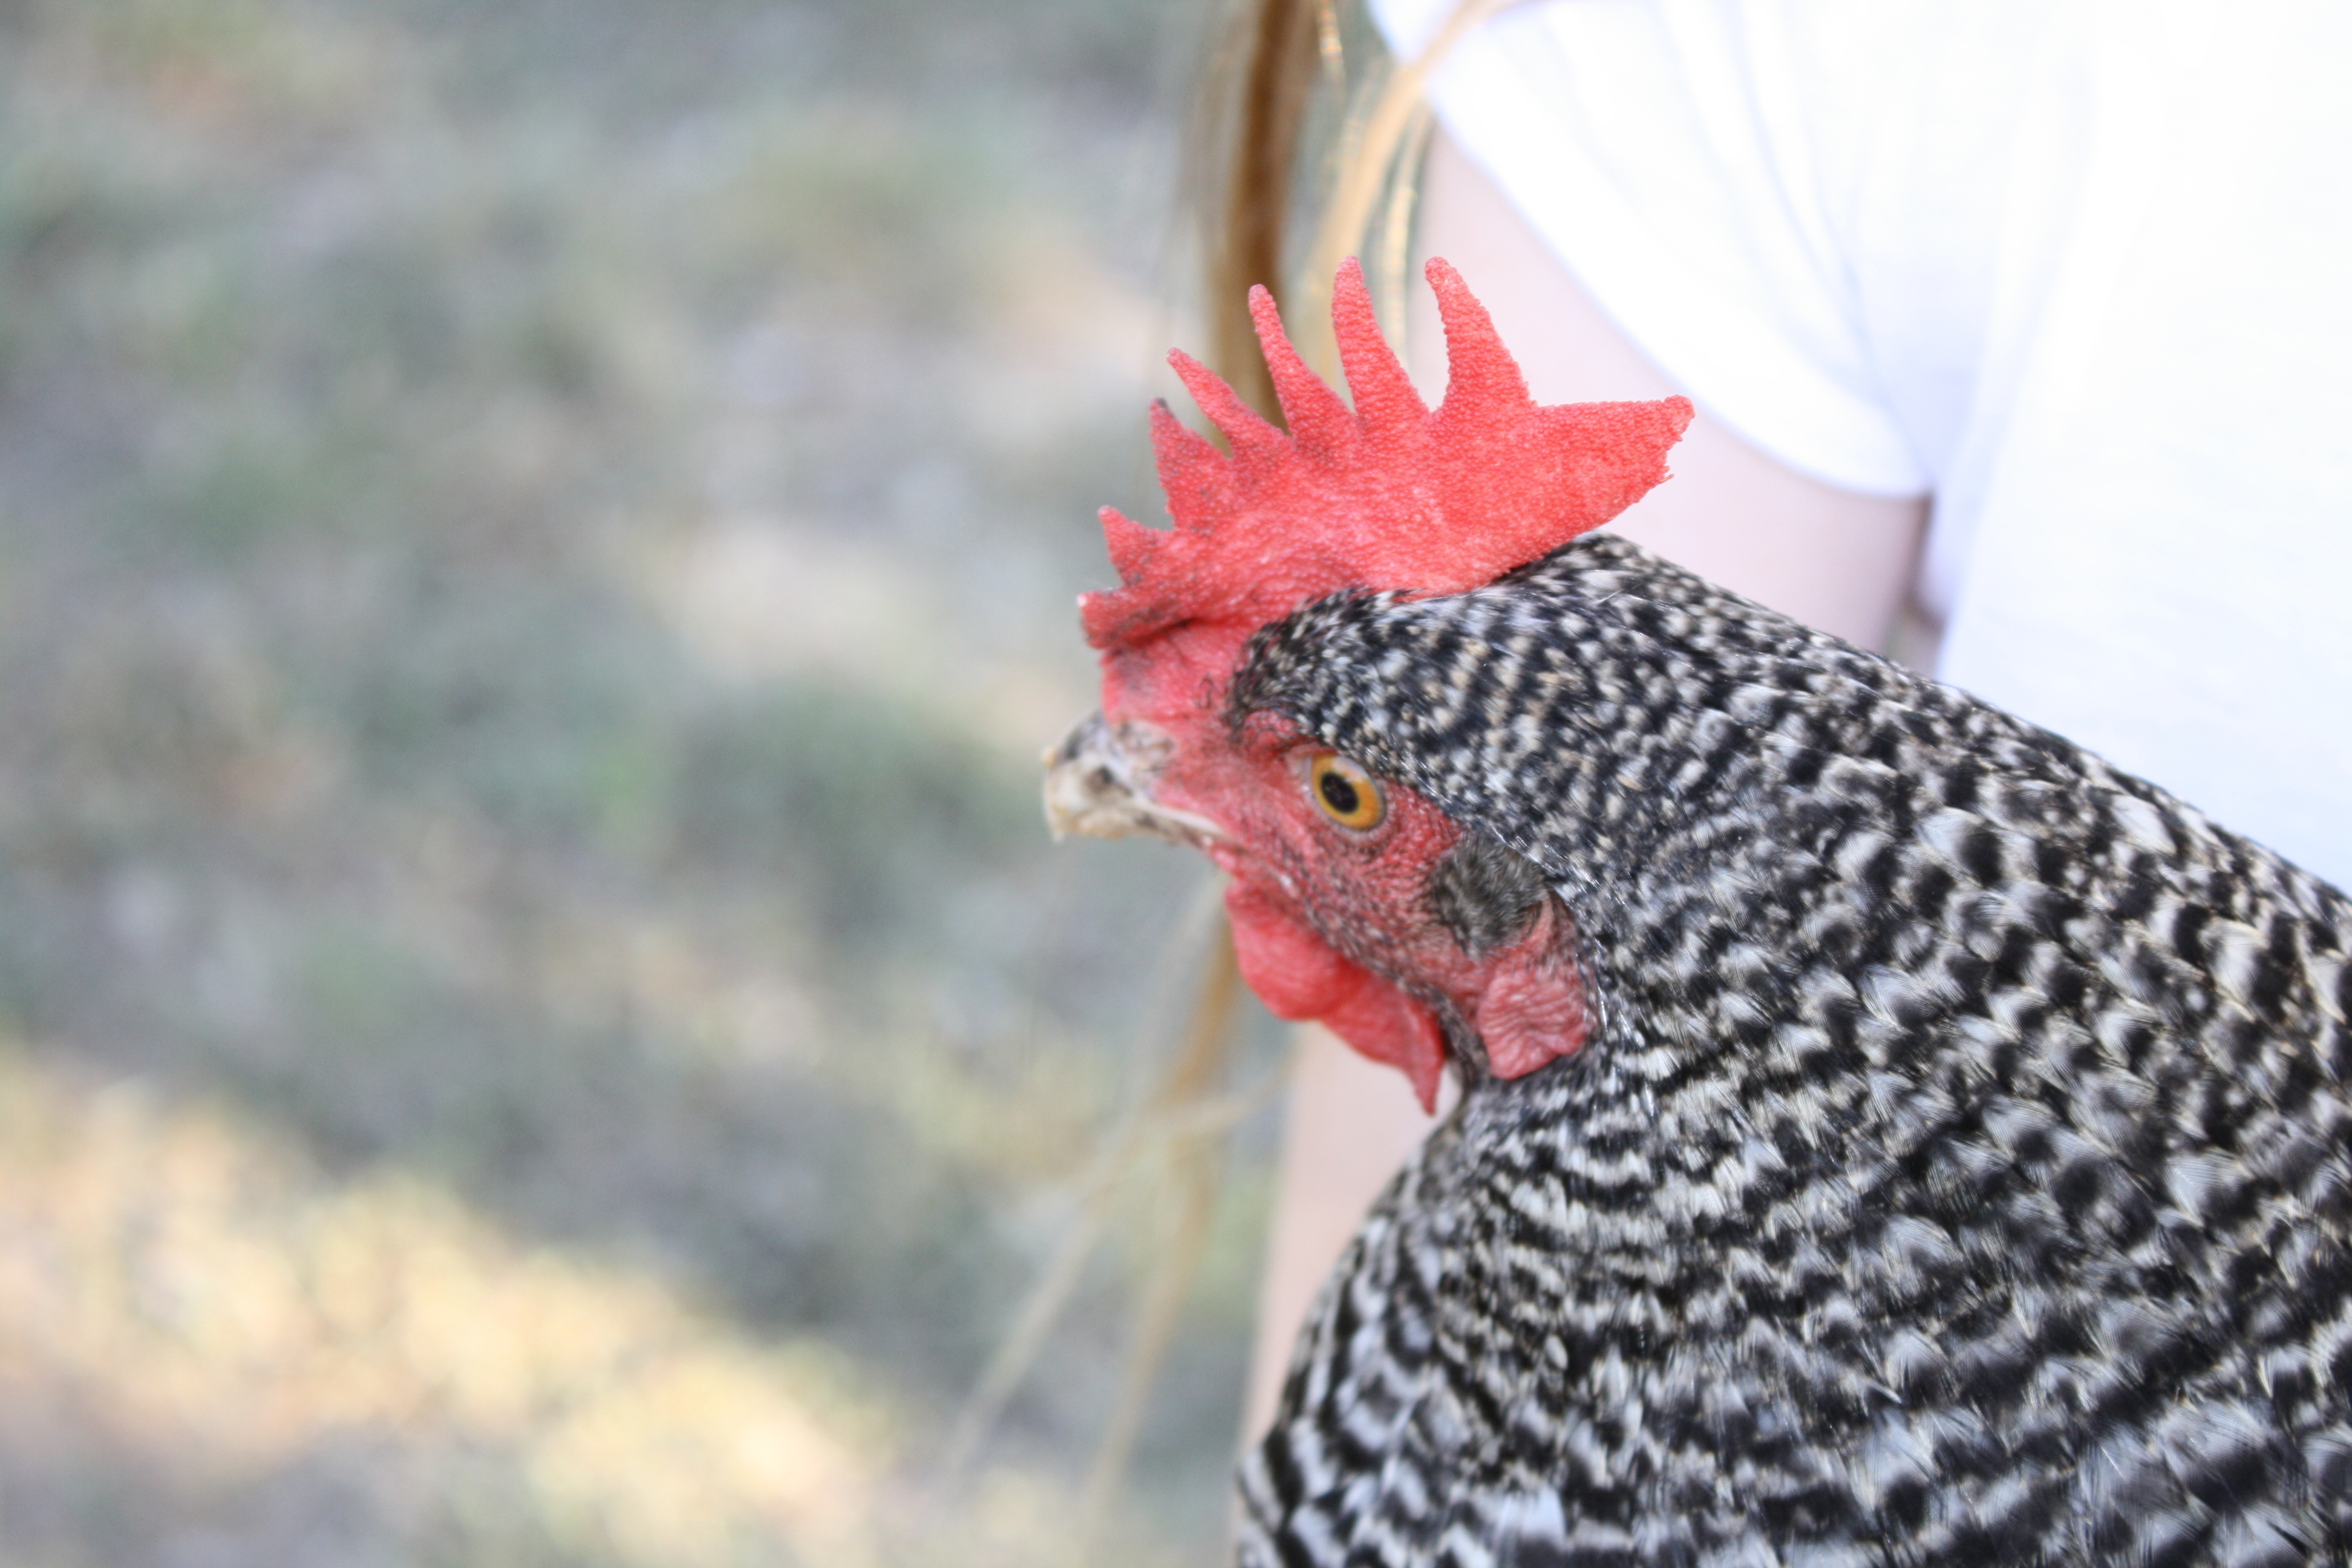 My family raises chickens. This one is named Rocky.